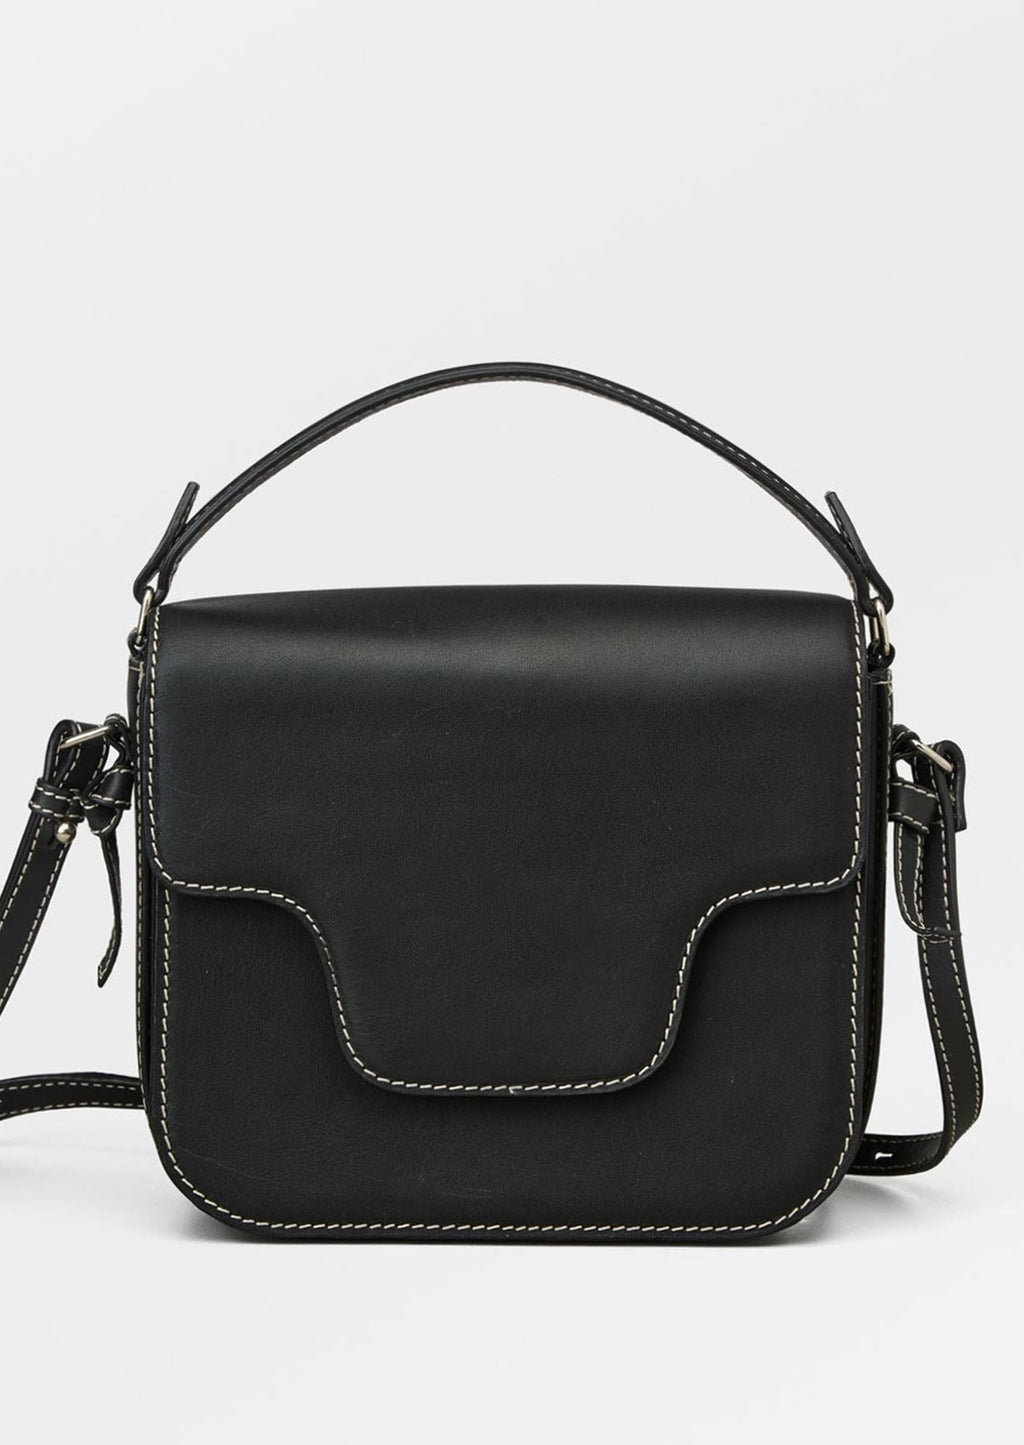 Black: A leather handbag in black with white contrast stitching and flap front design.